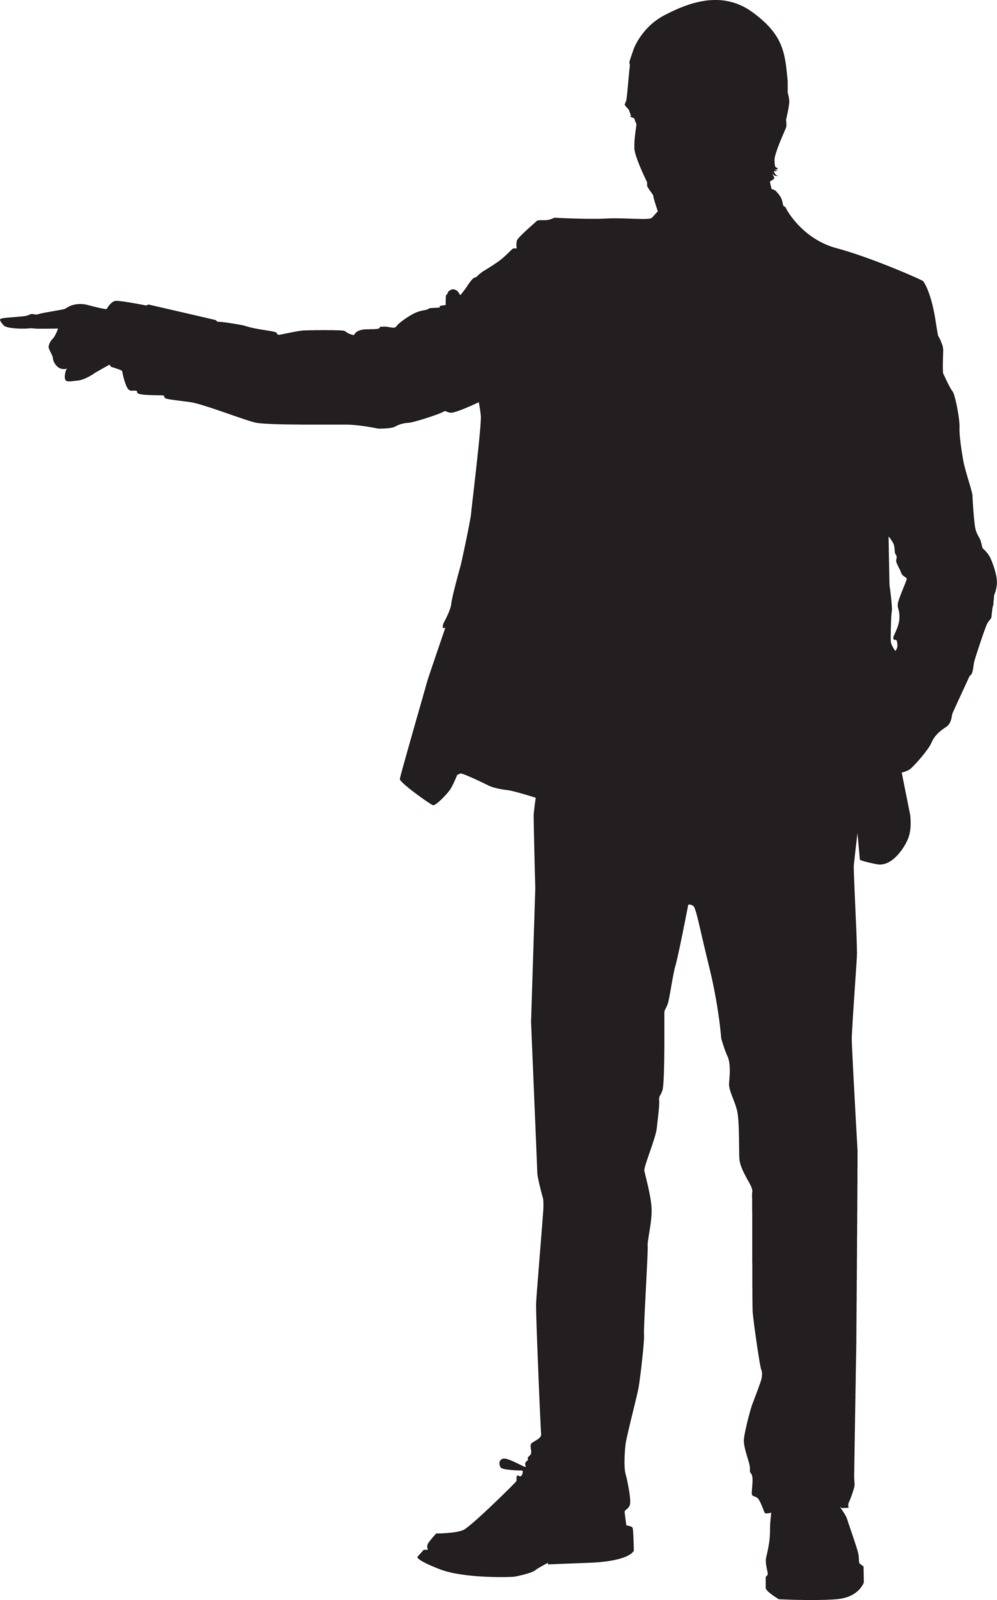 Silhouette of a man pointing with his finger, illustration, vect by Morphart